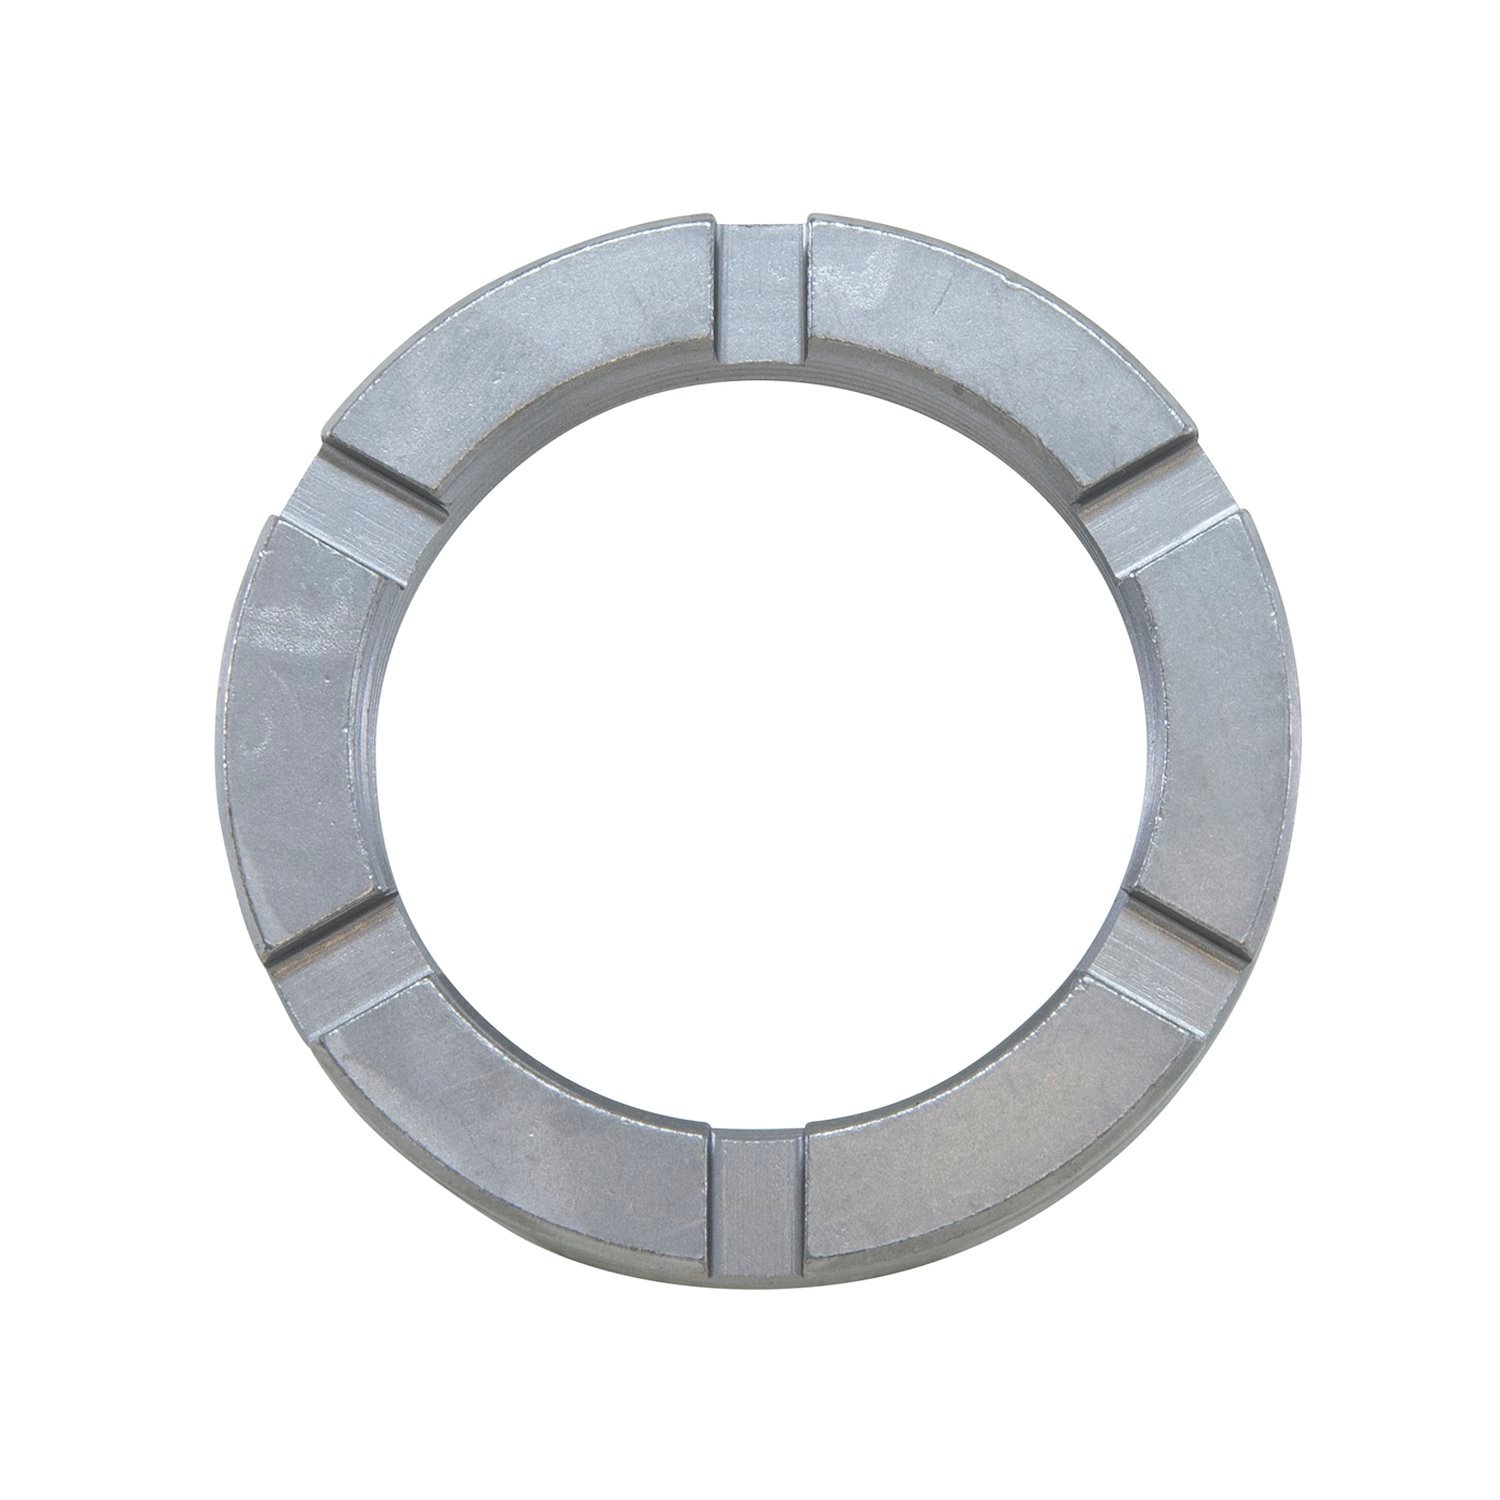 Spindle Nut, 2.065 in. I.D., Six Slots.